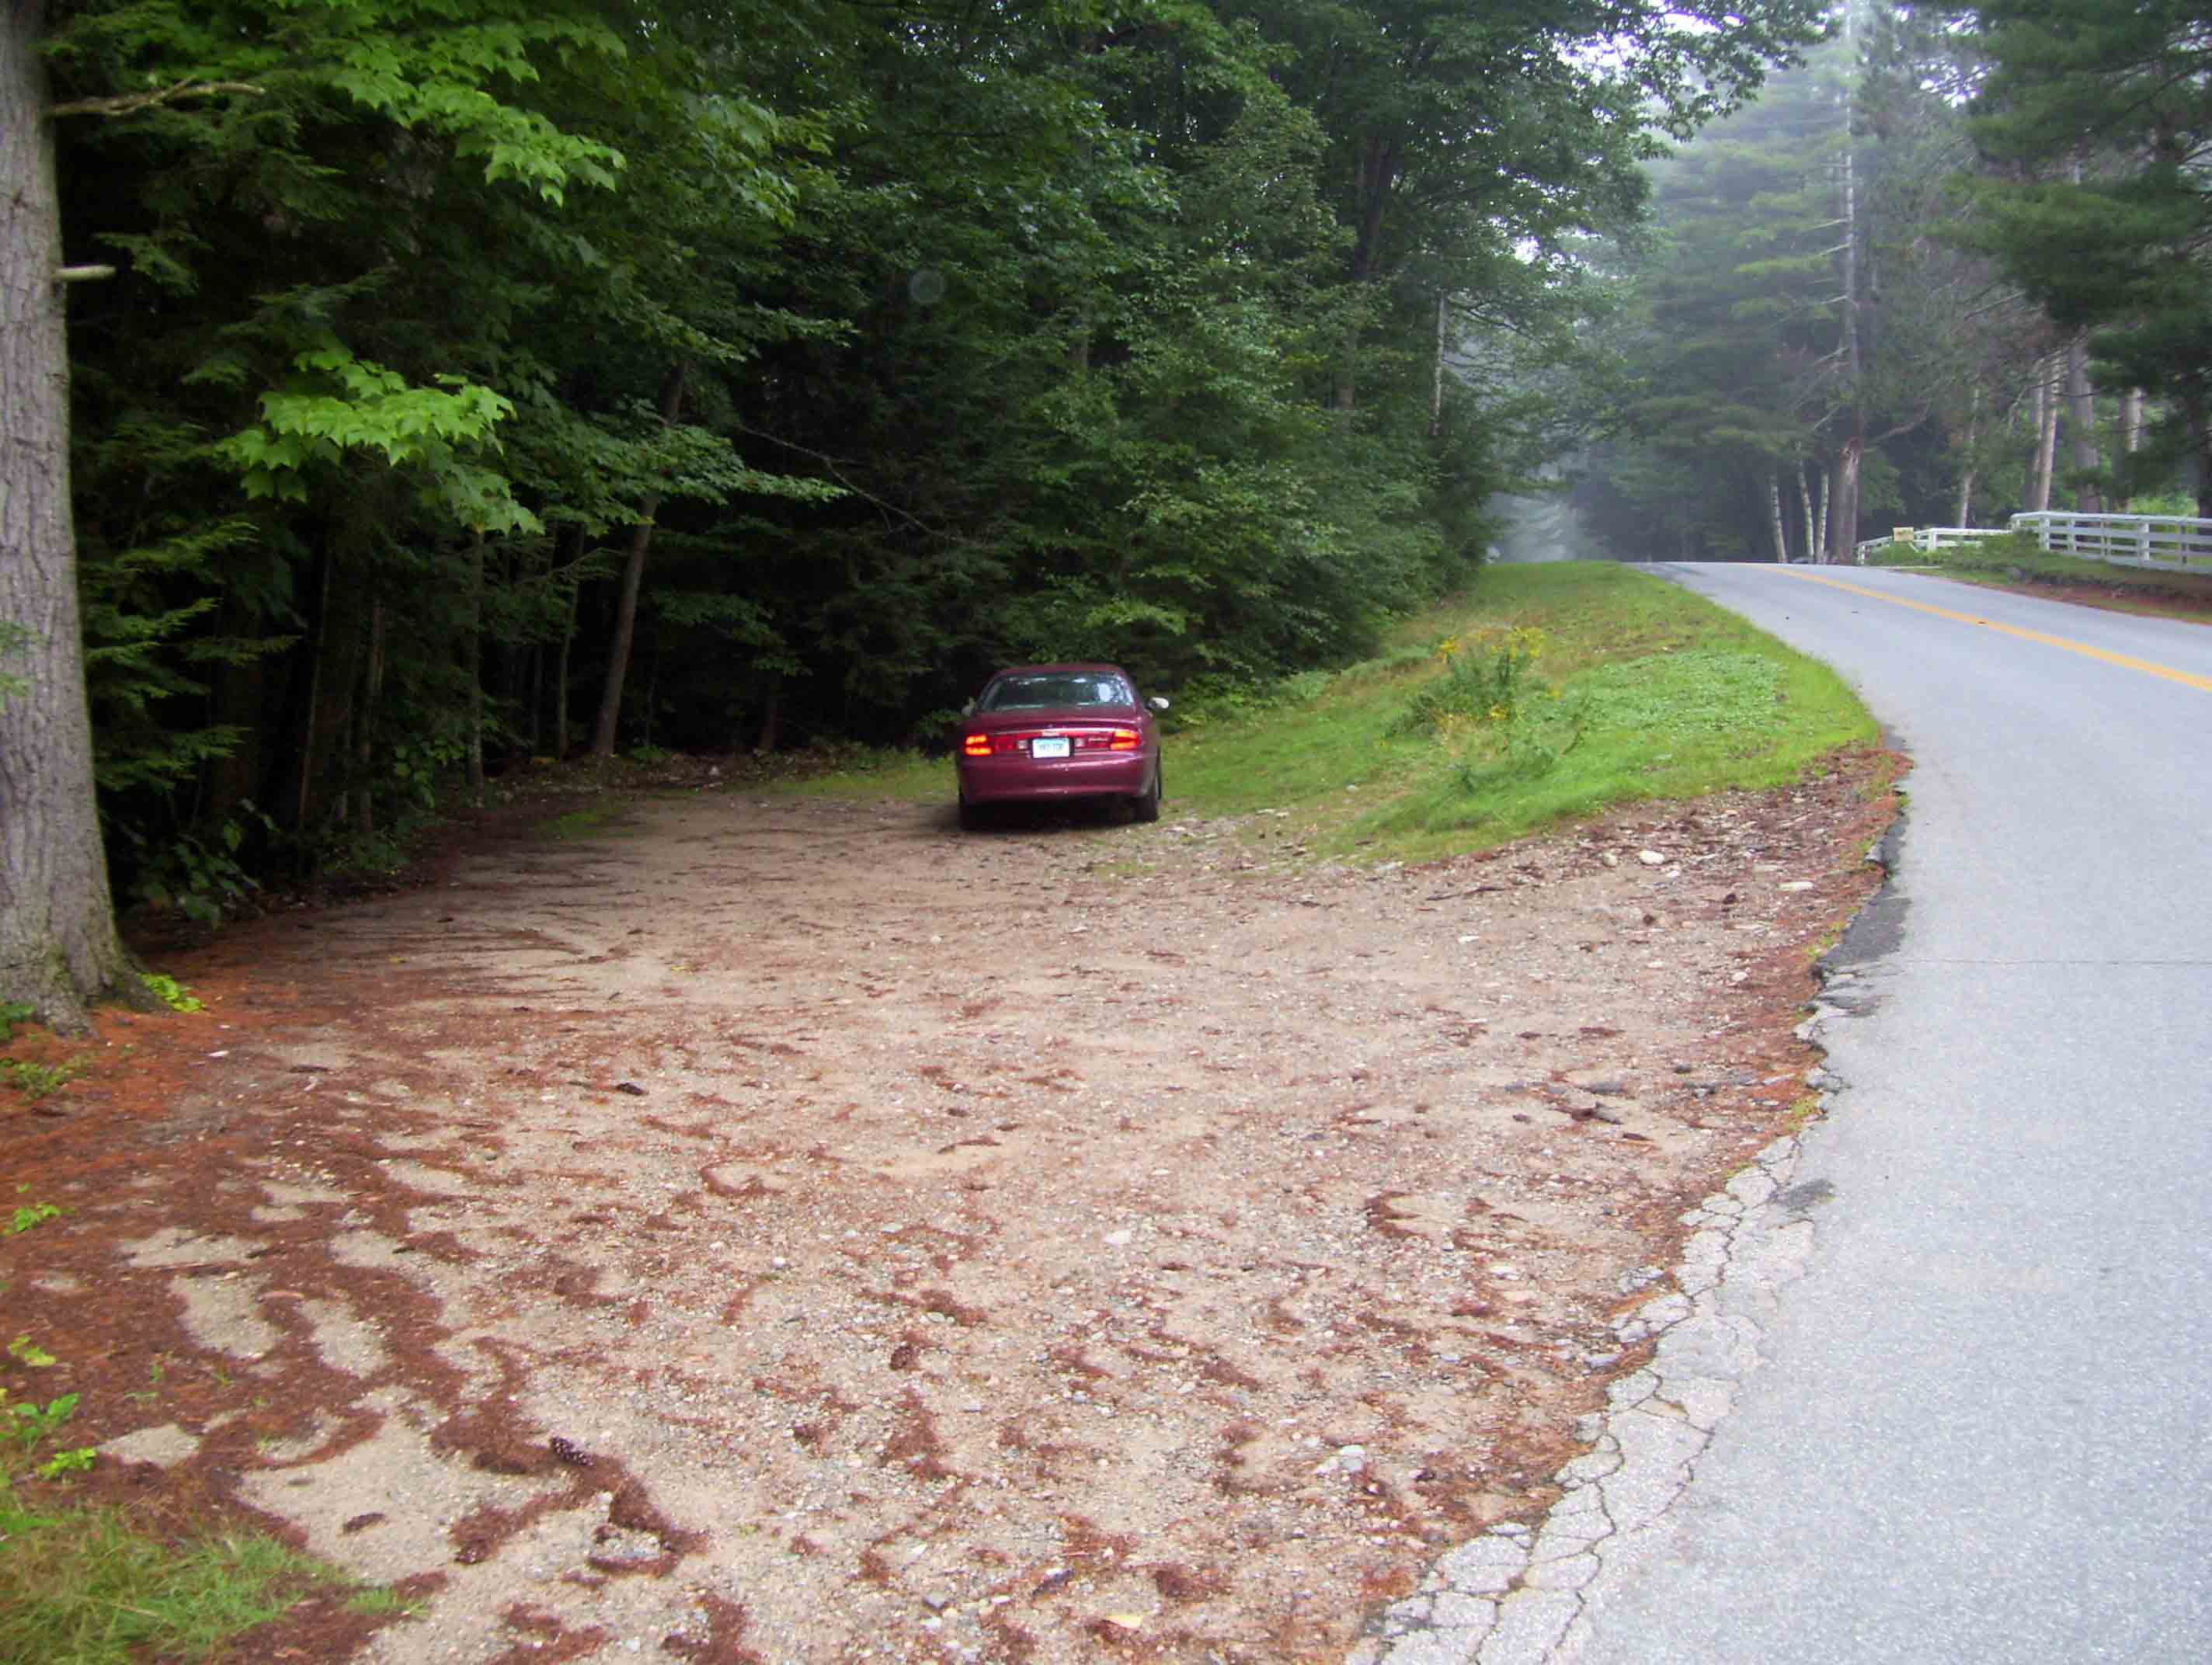 mm 4.7 Parking area for the Austin Brook Trail on North Road in Shelburne, NH.  Courtesy dlcul@conncoll.edu